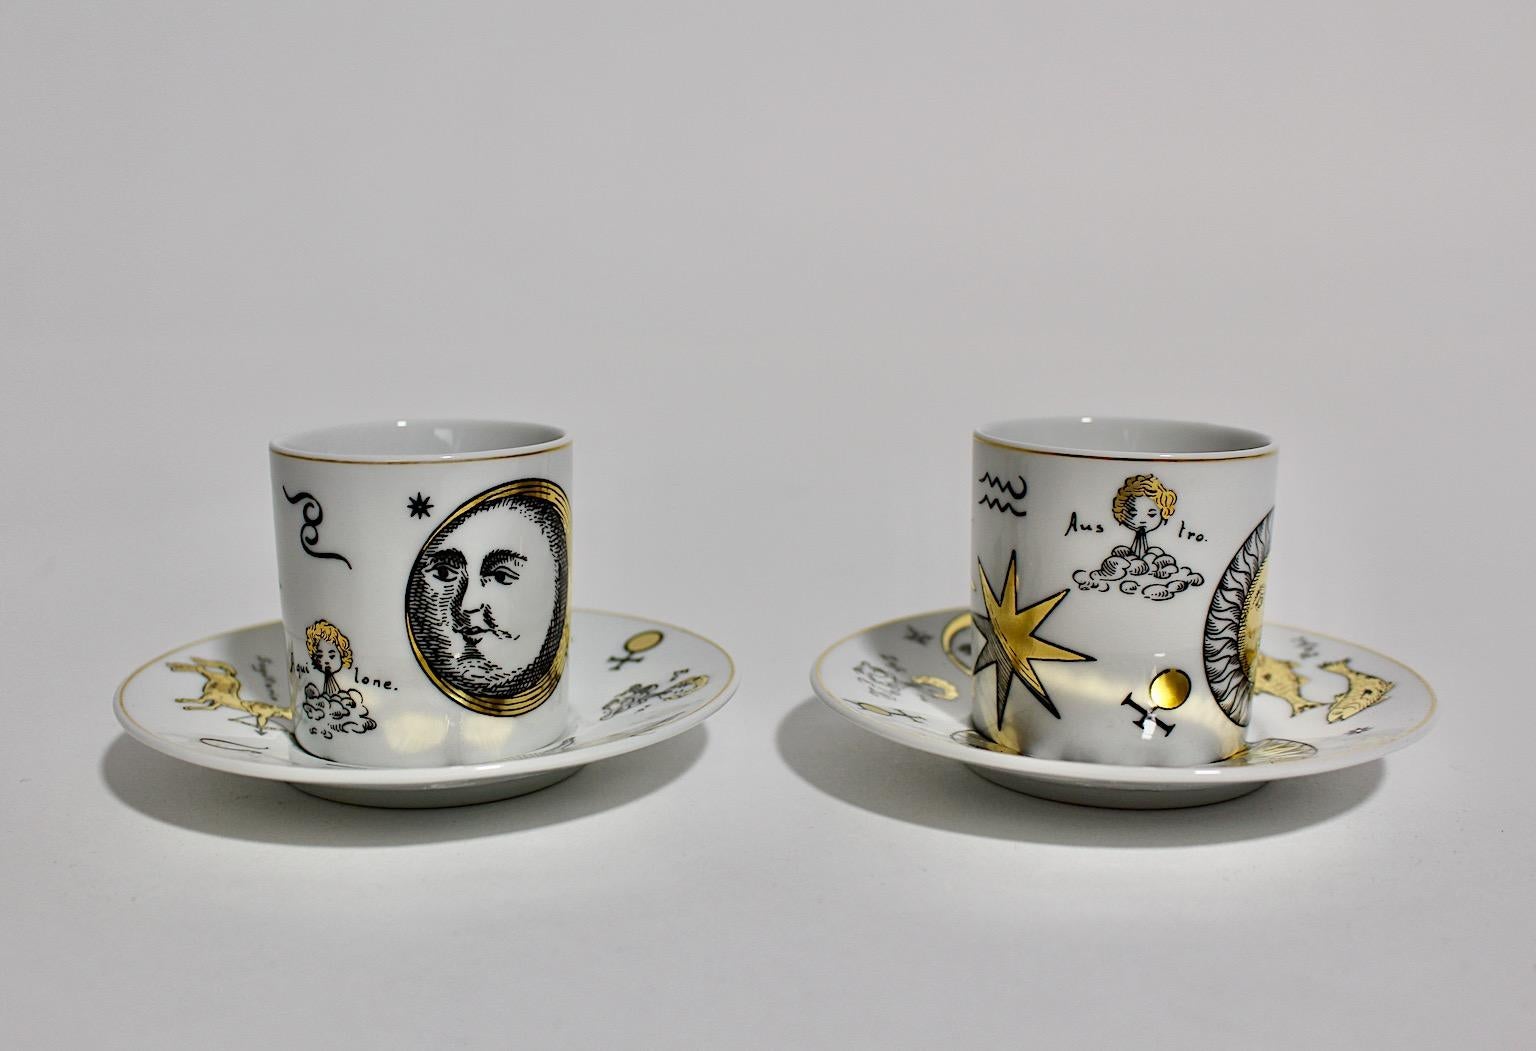 Modern vintage duo set of Espresso cups from porcelain designed by 
Piero Fornasetti for Rosenthal 1980s.
Stunning duo set of espresso cups from porcelain with printed pattern with saucer by Piero Fornasetti for Rosenthal 1980s.
The cups and the